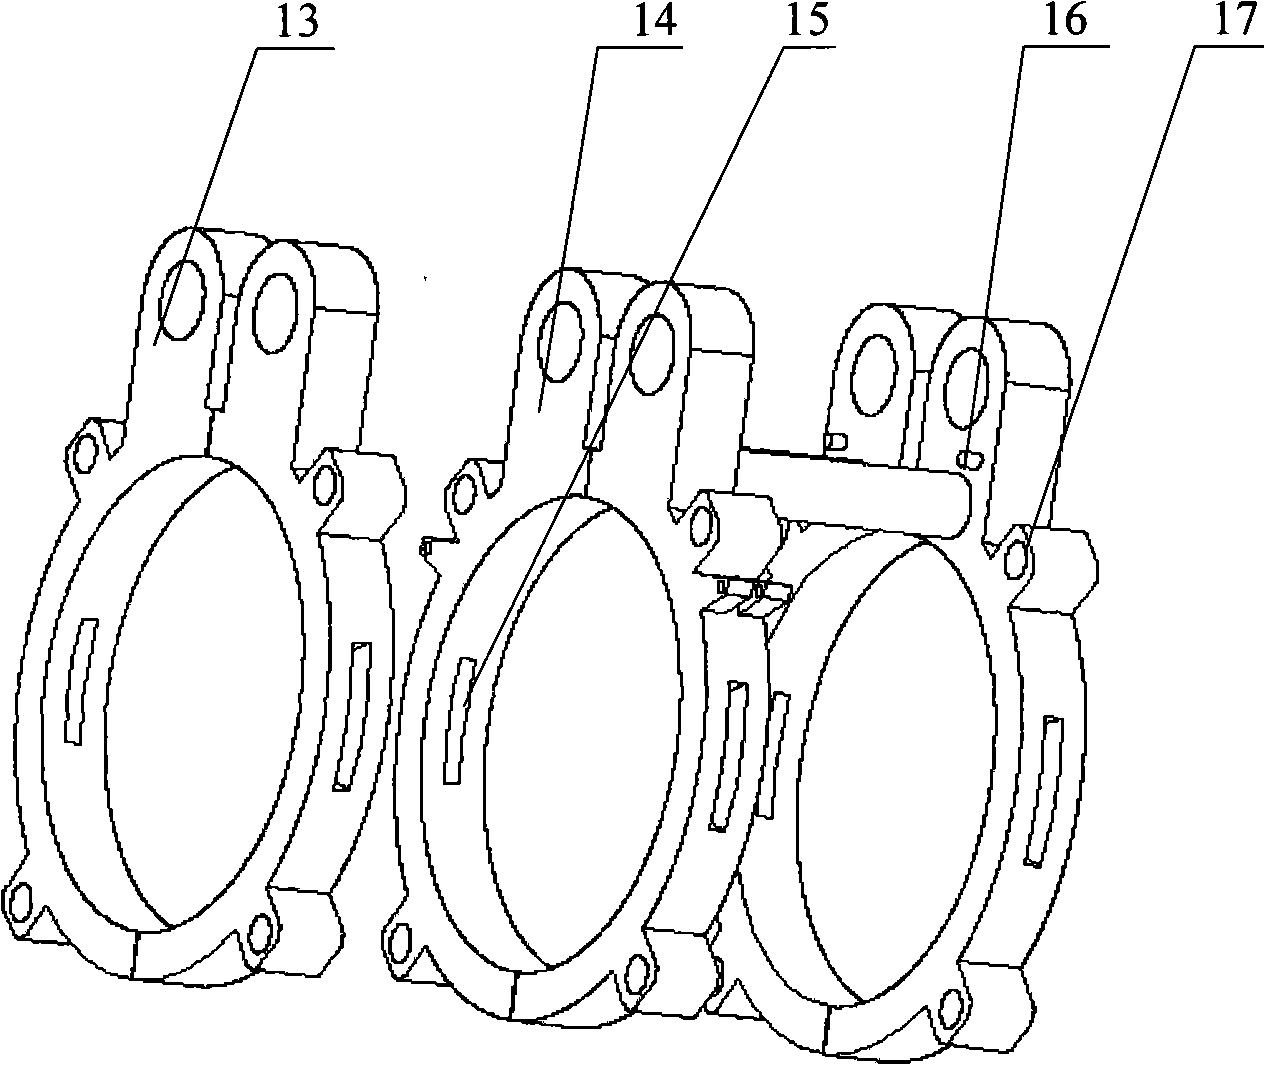 Deep water flange automatic connection bolt insertion and flange hole aligning device